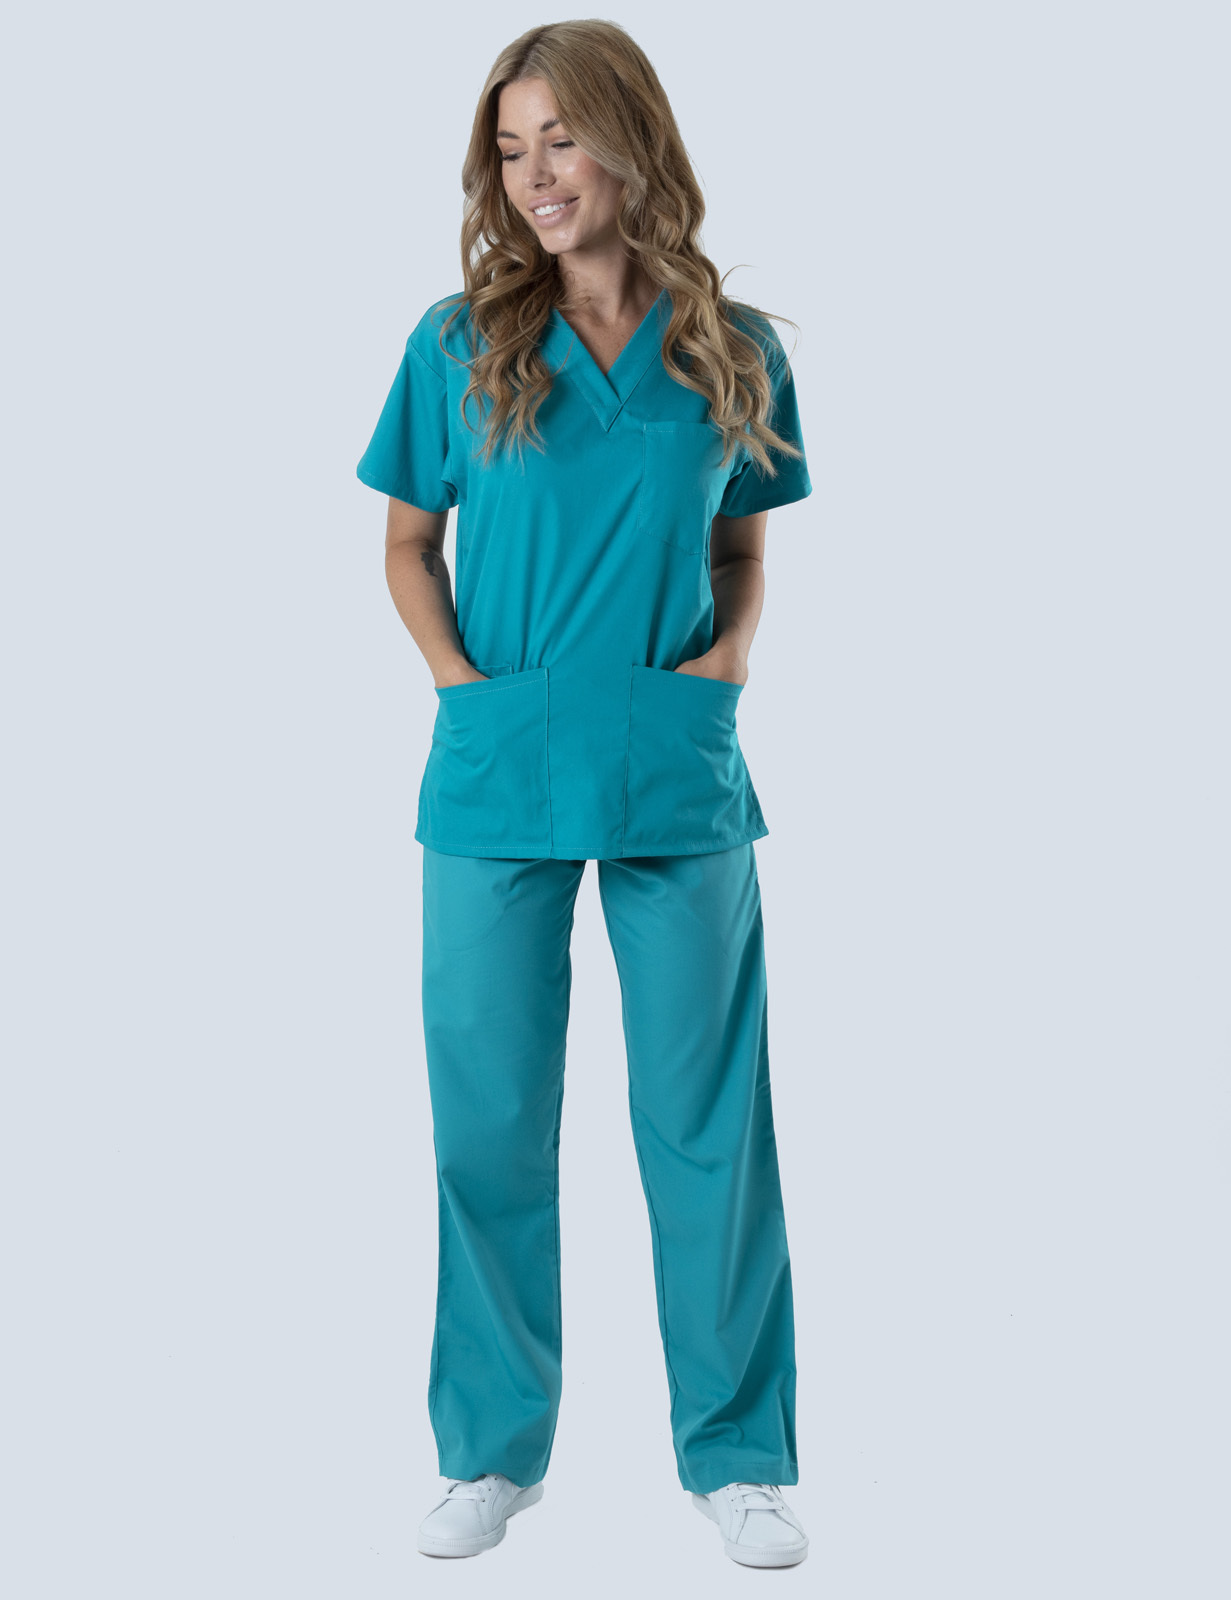 Children's Hospital Melbourne - ED (4 Pocket Scrub Top and Cargo Pants in Teal incl Logos)